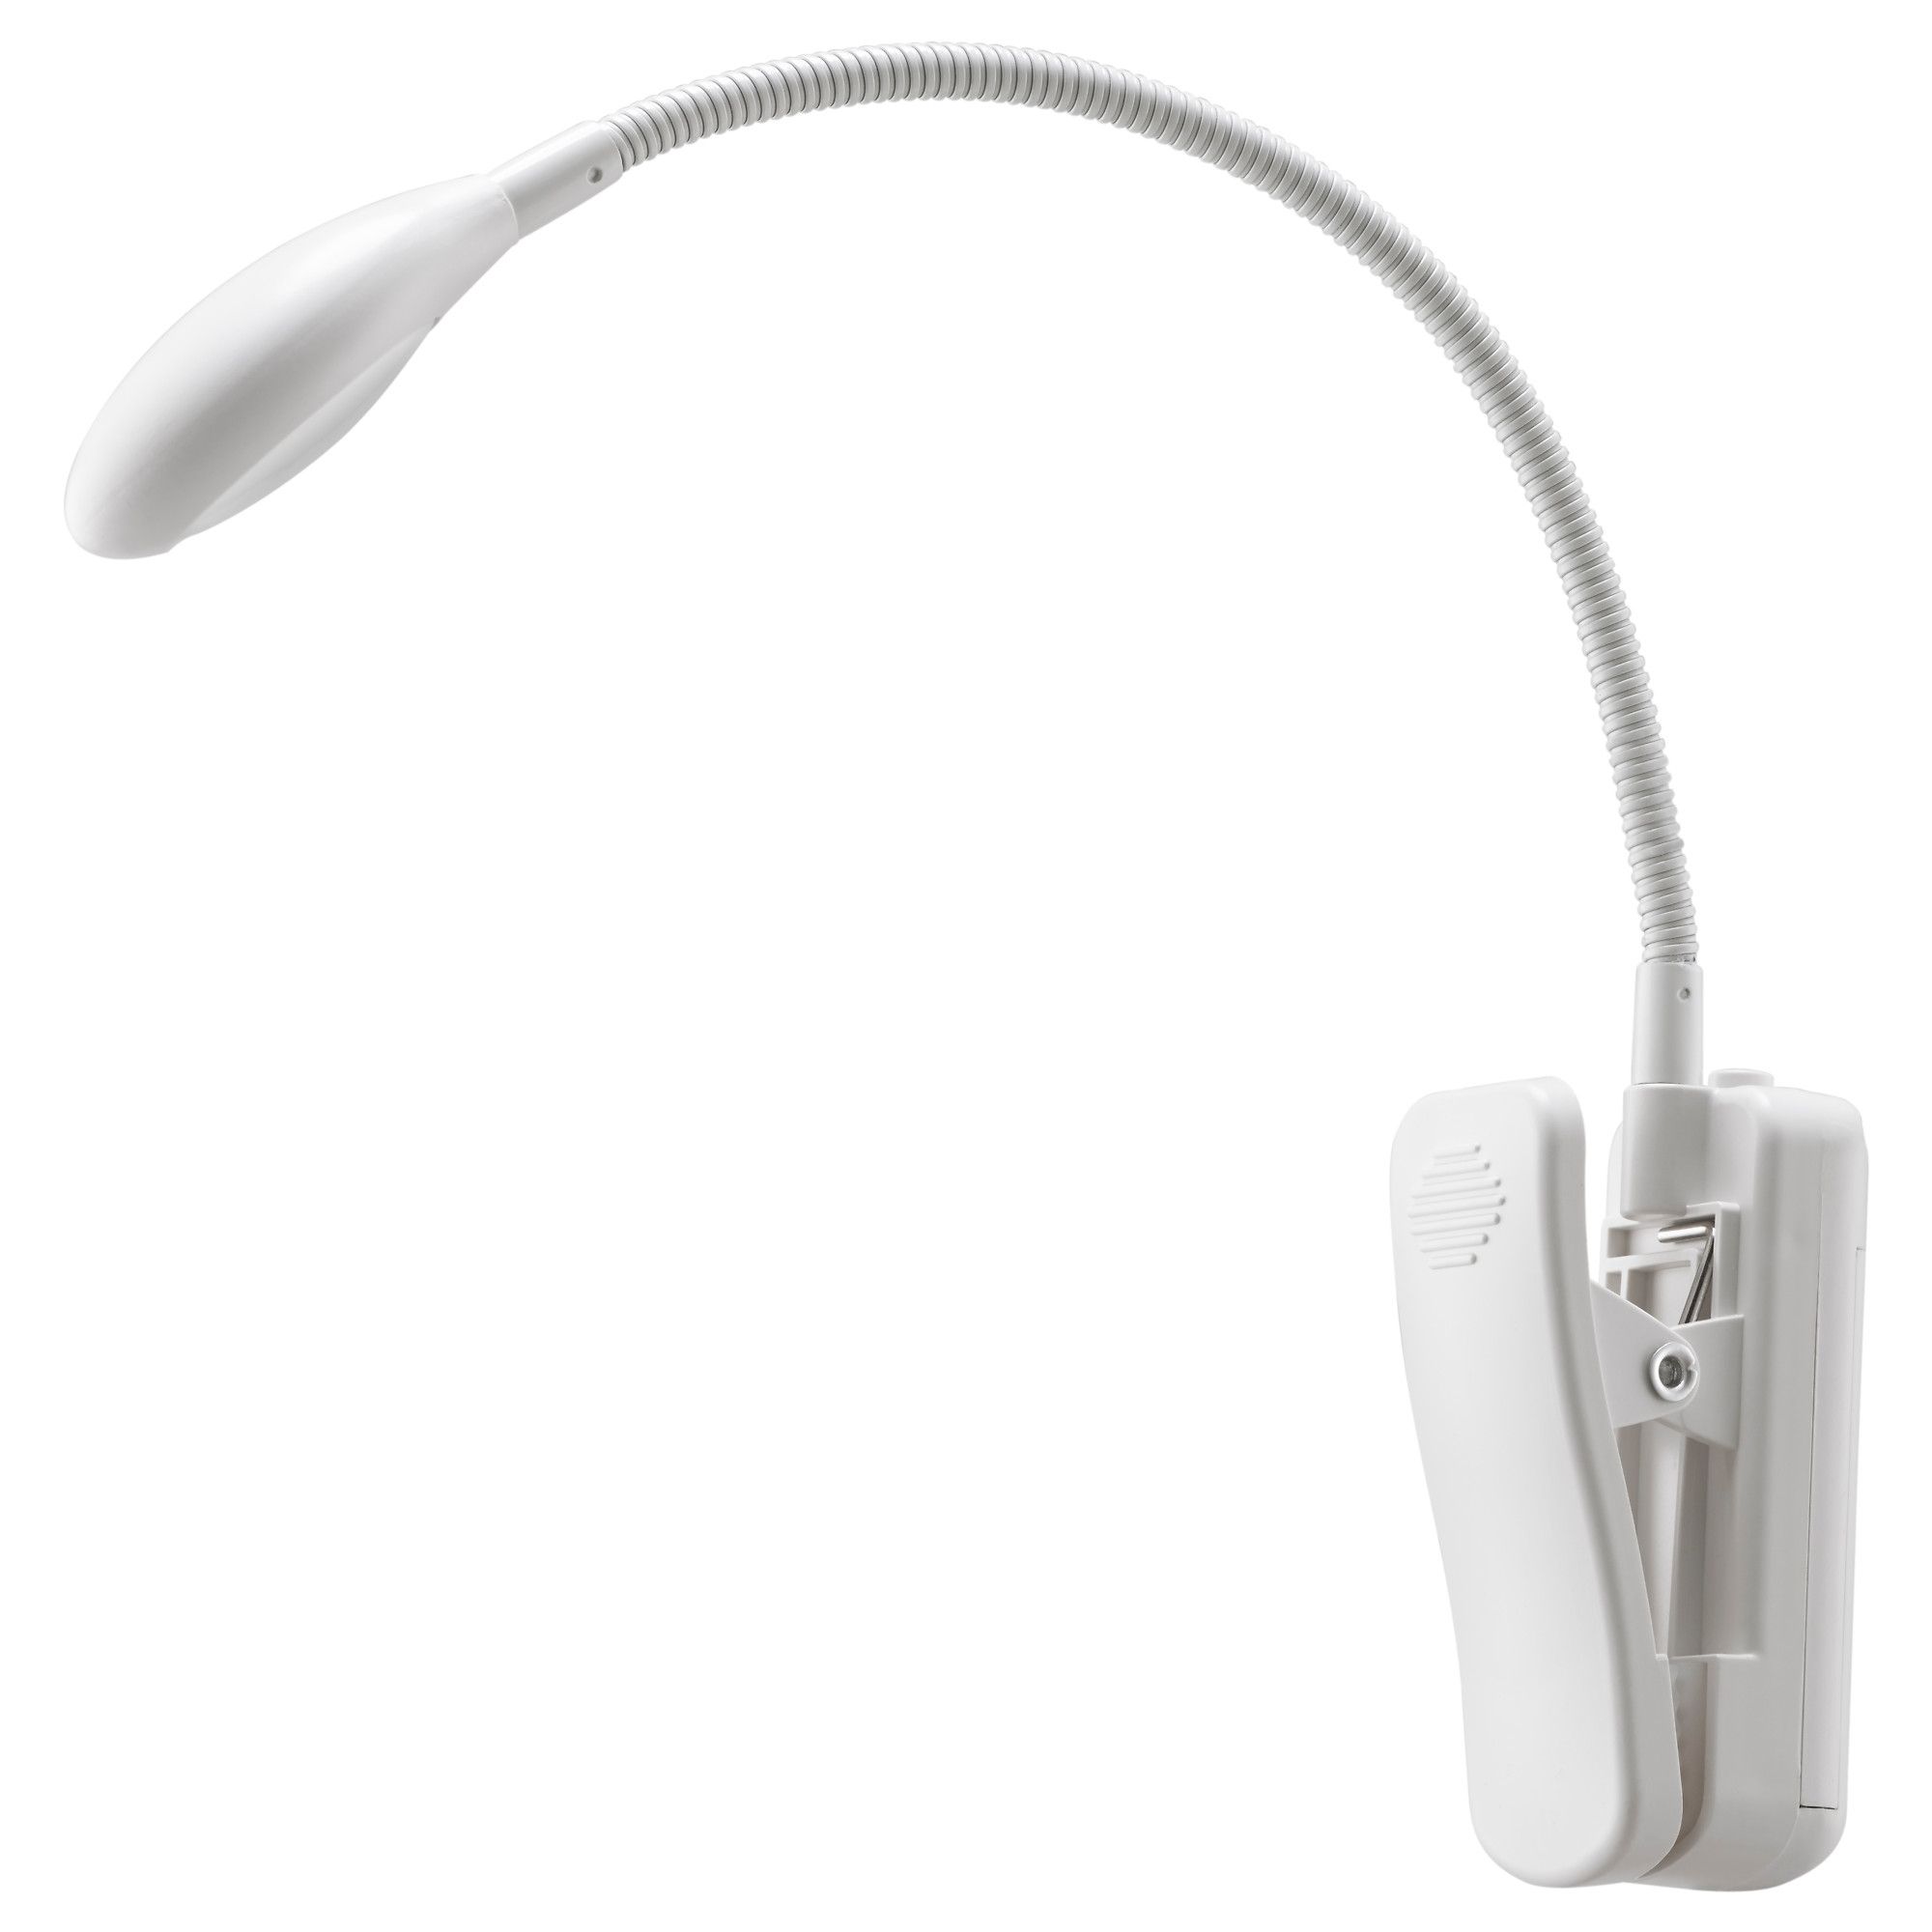 Ebbared Battery Operated Clamp Spotlight – Ikea Pertaining To Ikea Battery Operated Outdoor Lights (View 15 of 15)